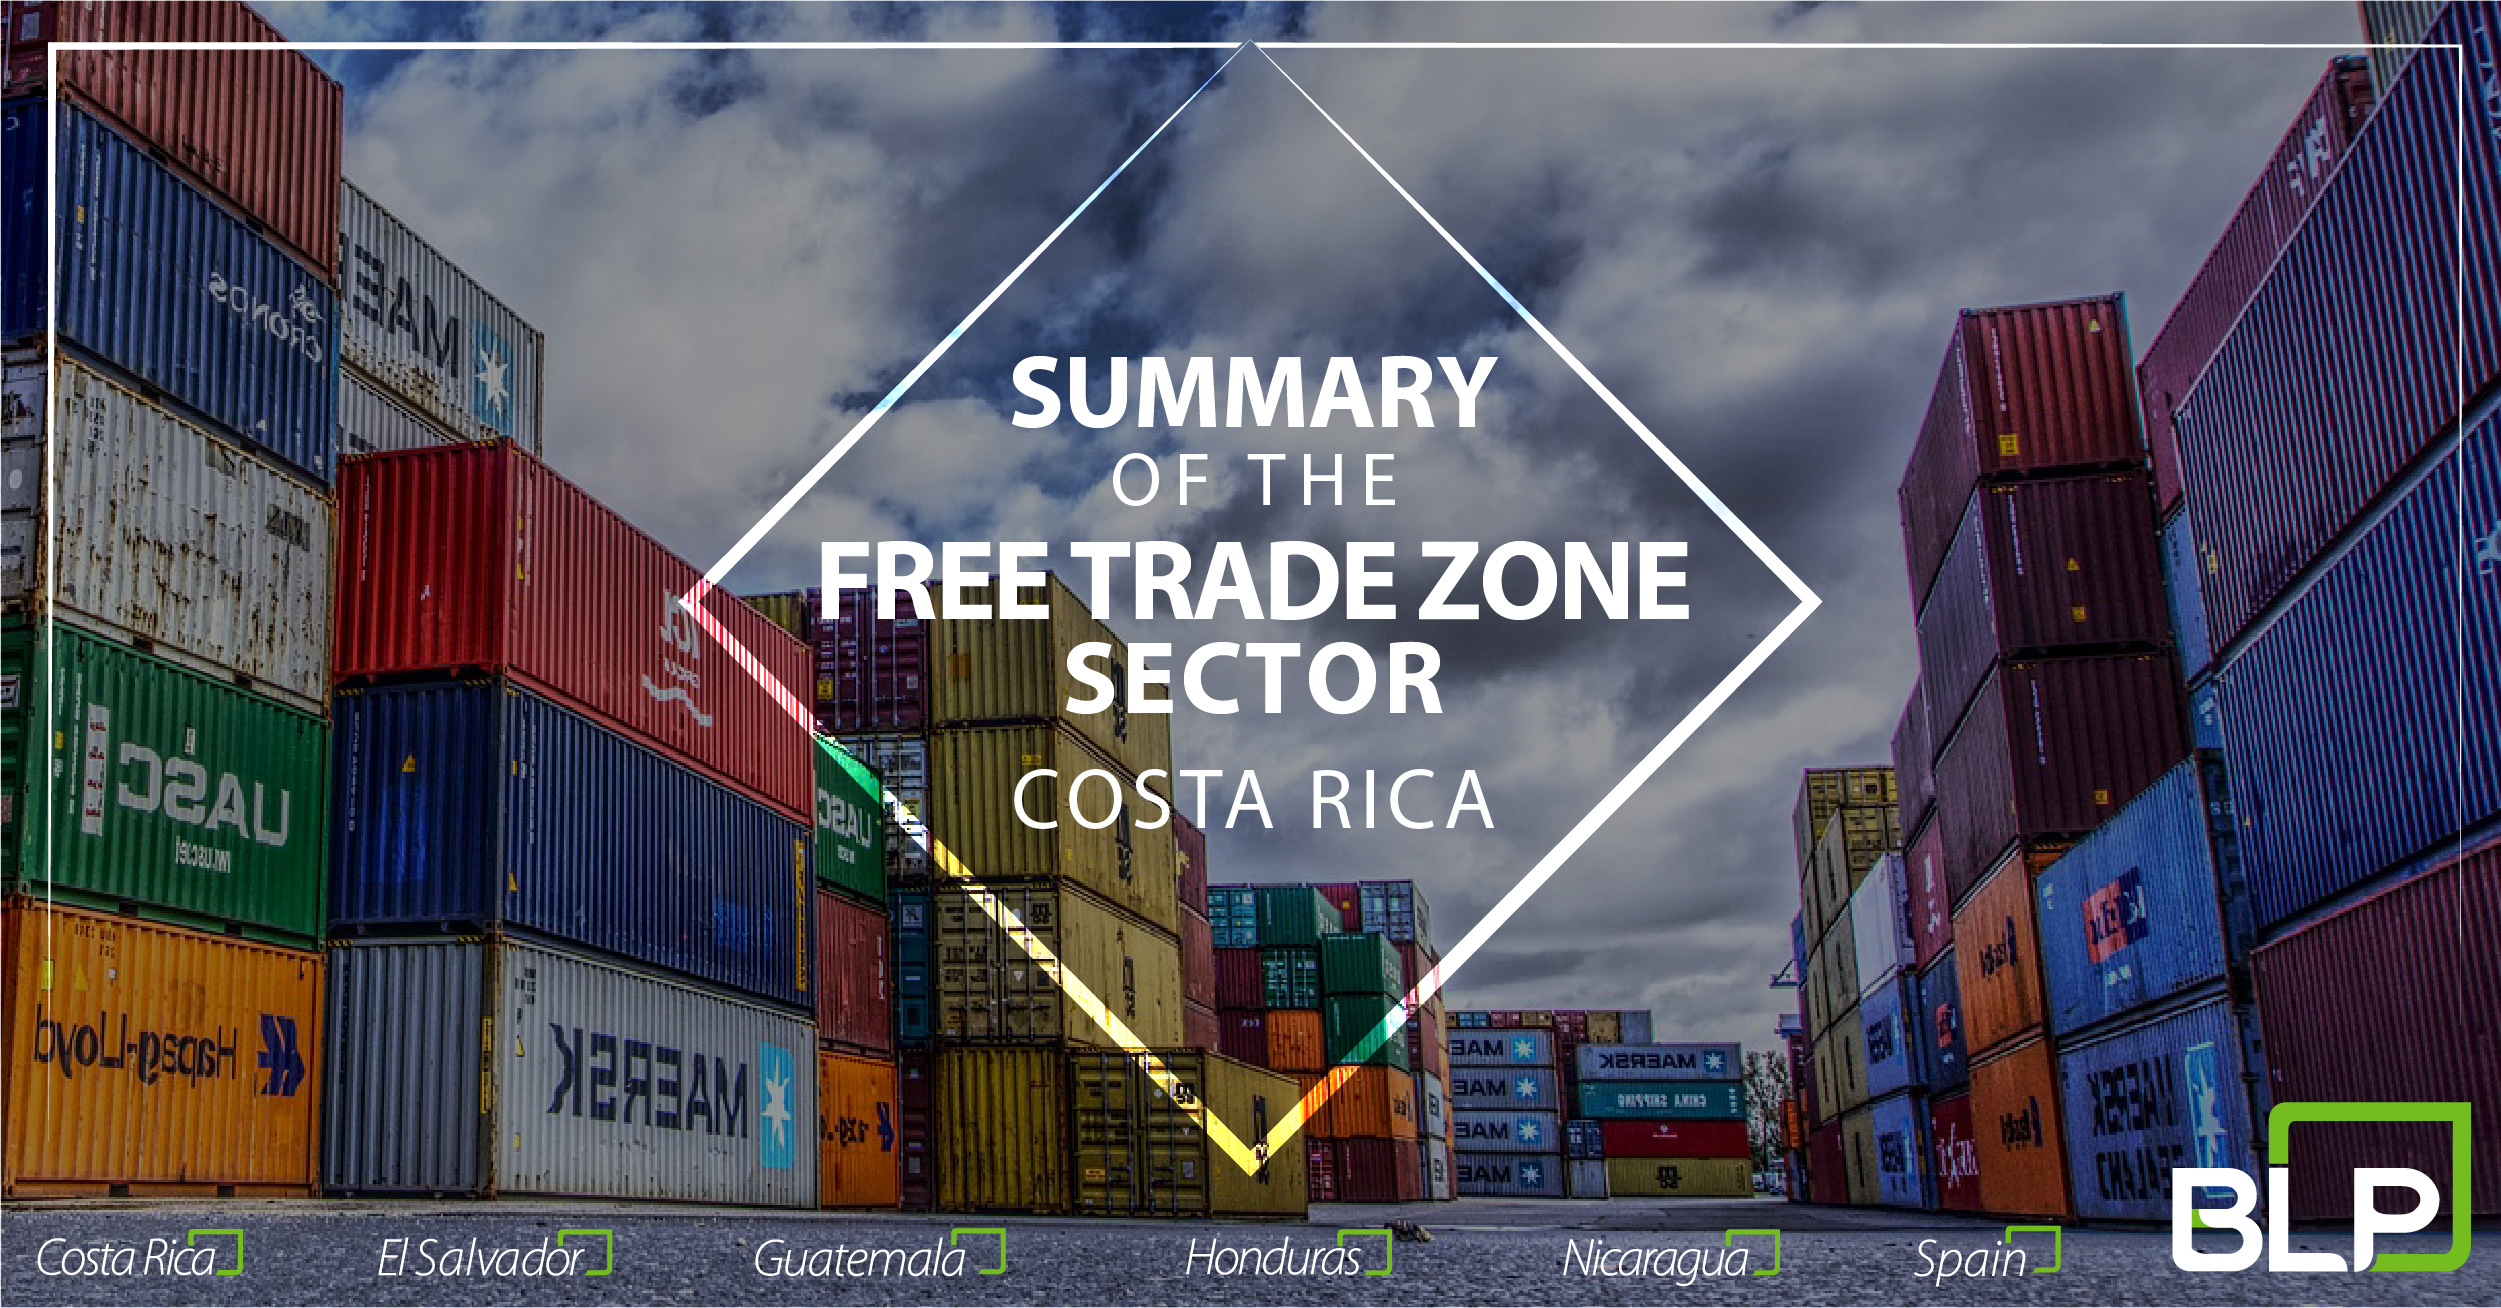 Free Trade Zones in Costa Rica: Country benefit and current issues